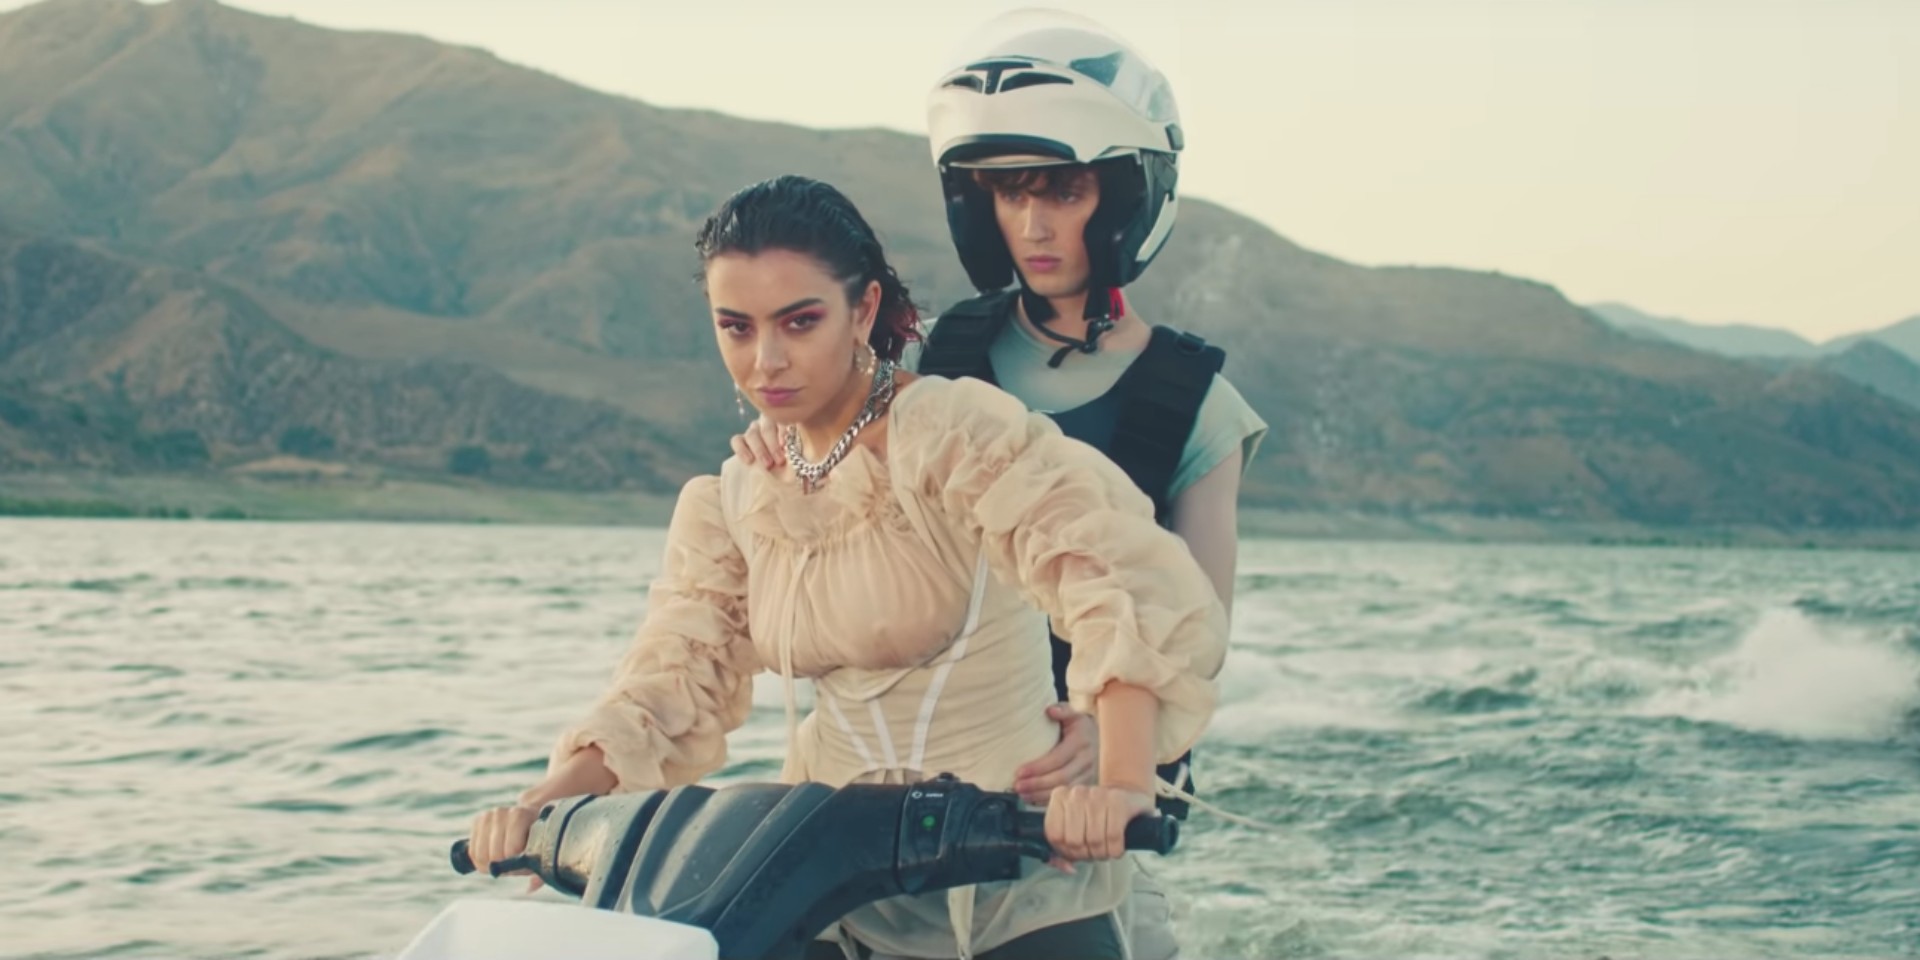 Charli XCX and Troye Sivan meet in the distant future on jet skis in '2099'